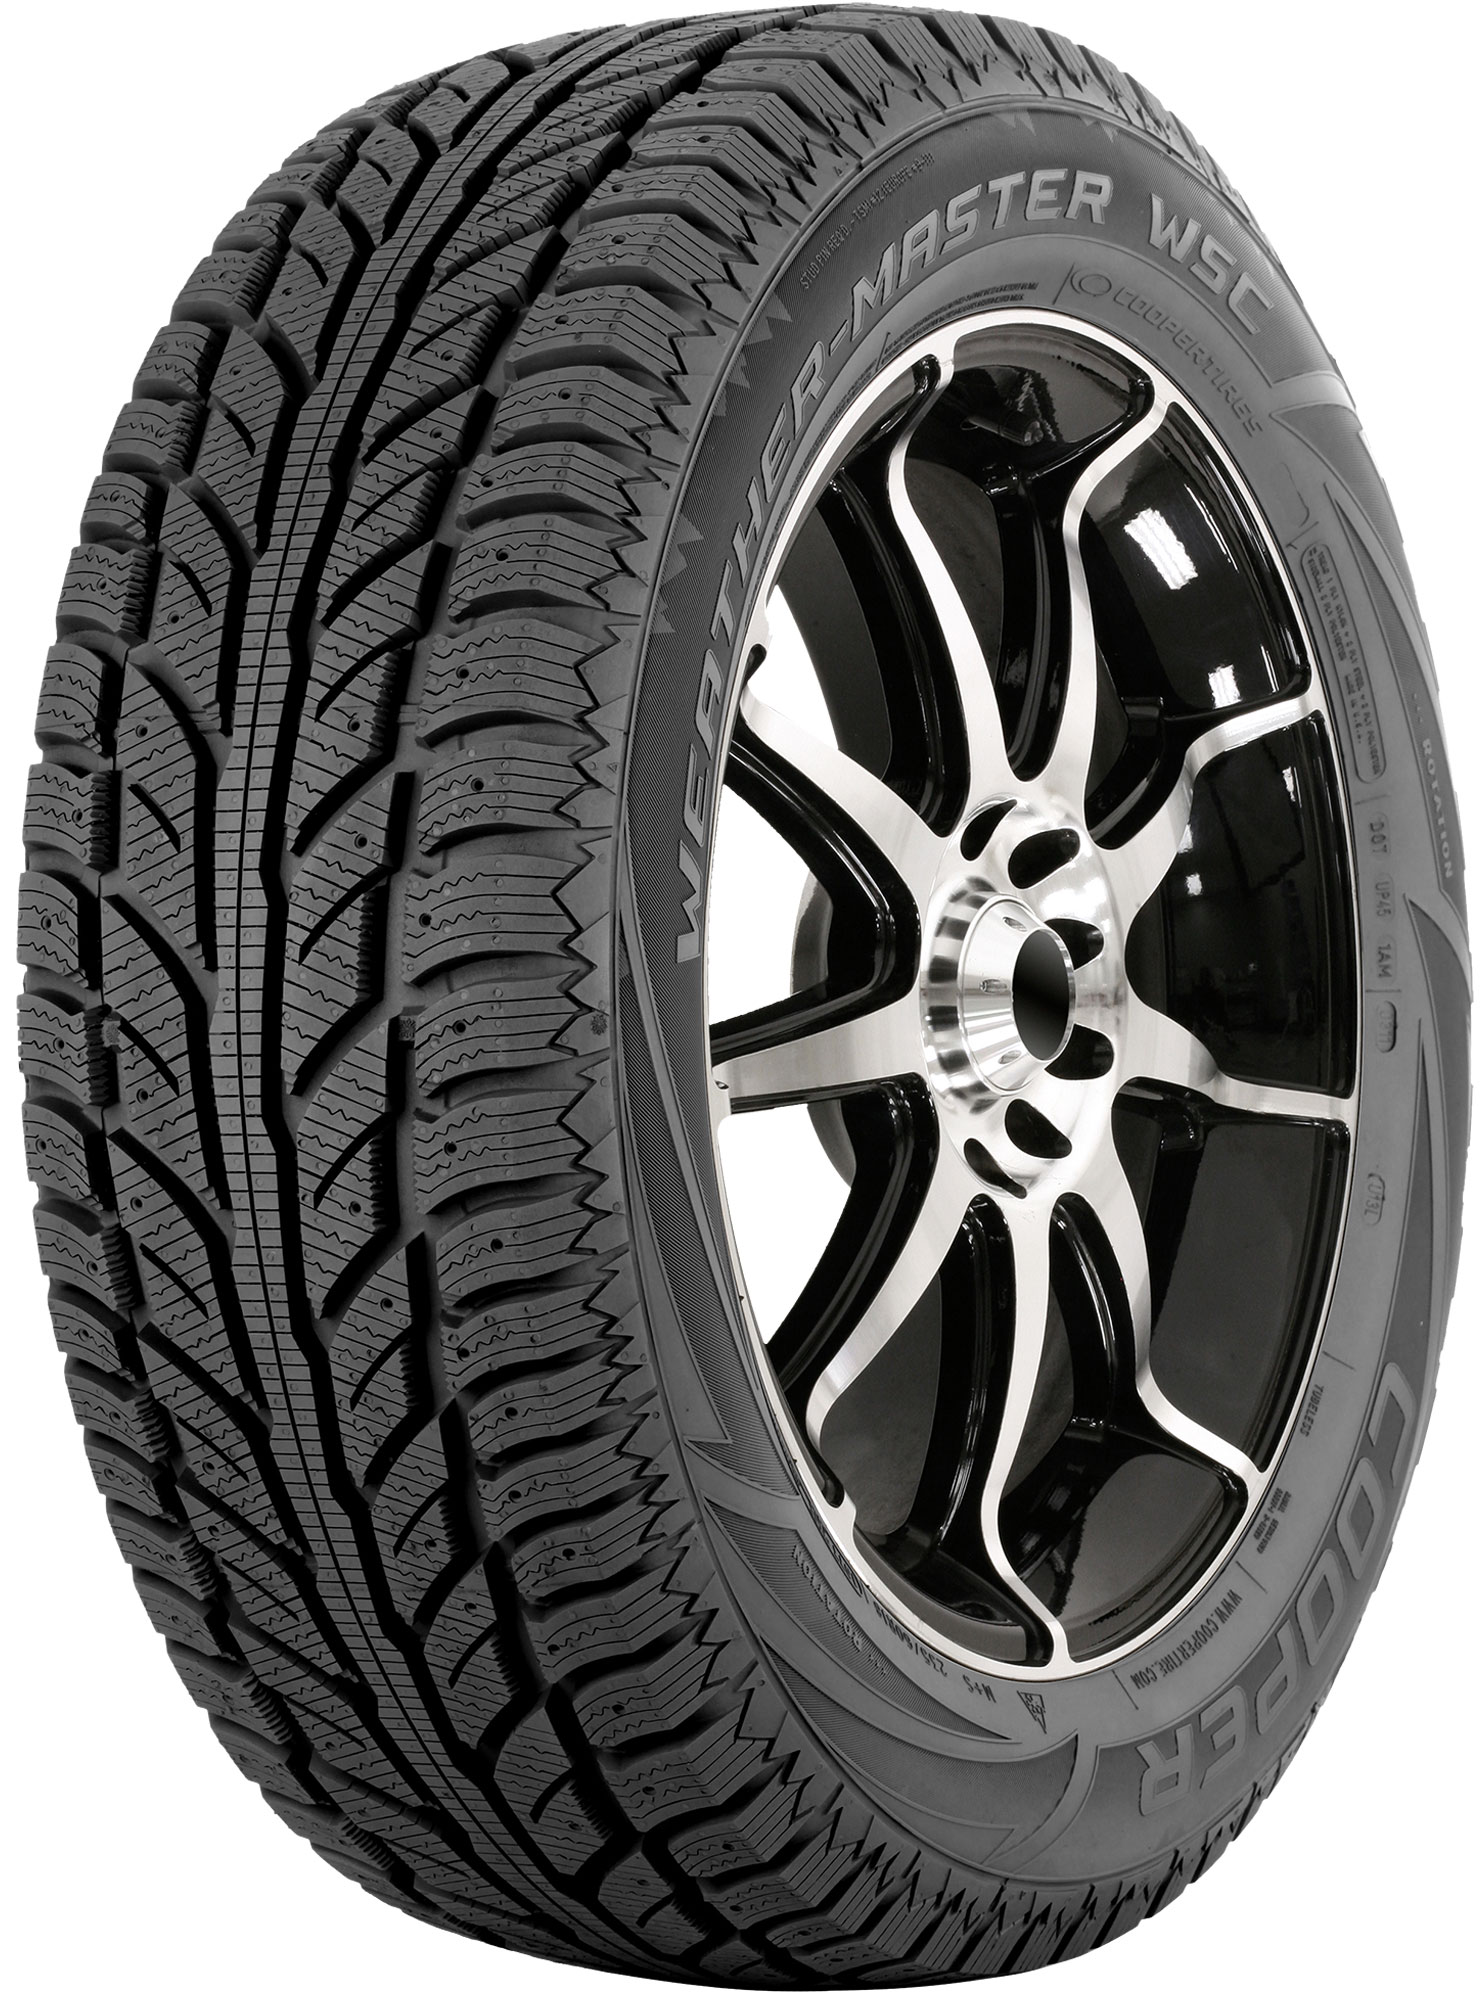 Buy Tires and Wheels Online | TireBuyer.com